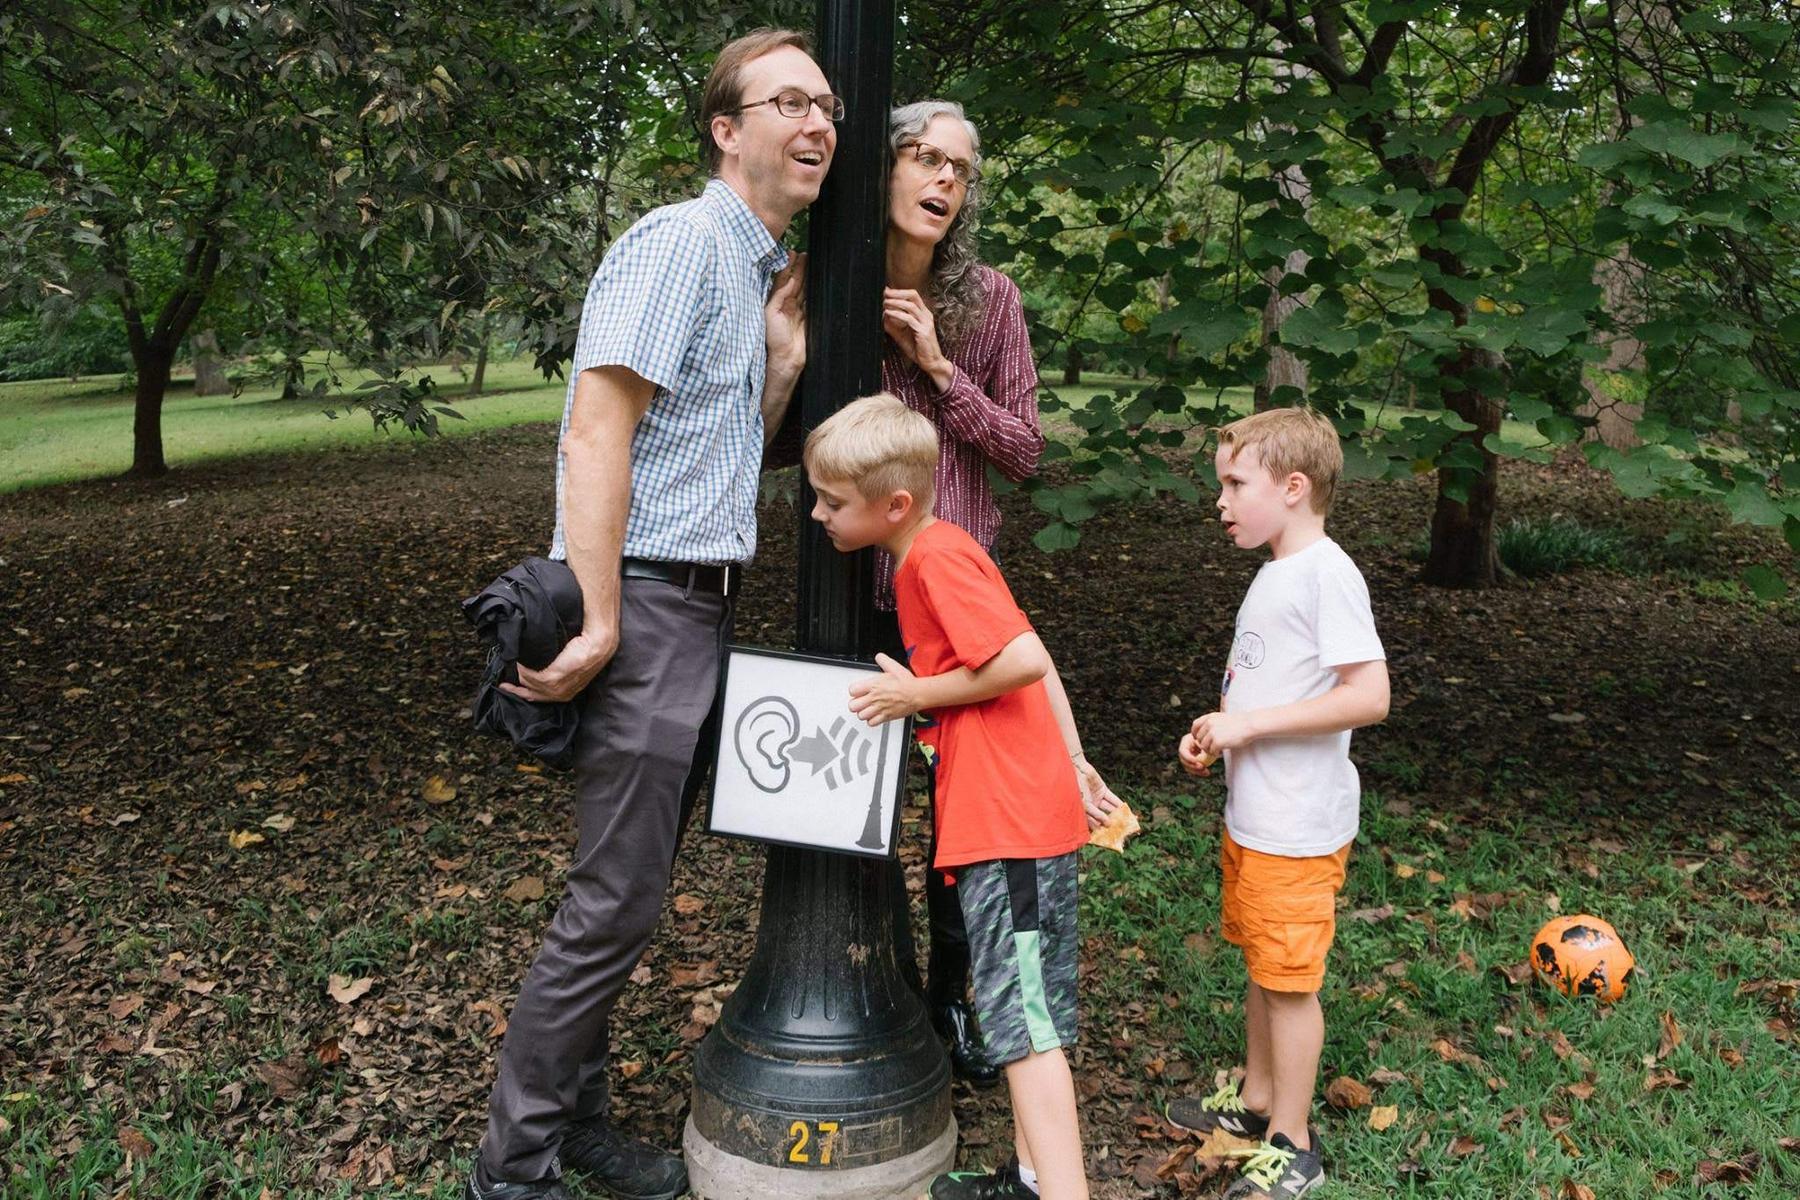 A family presses their ears agains a lamppost in Grant Park to hear historical sounds through bone conduction.